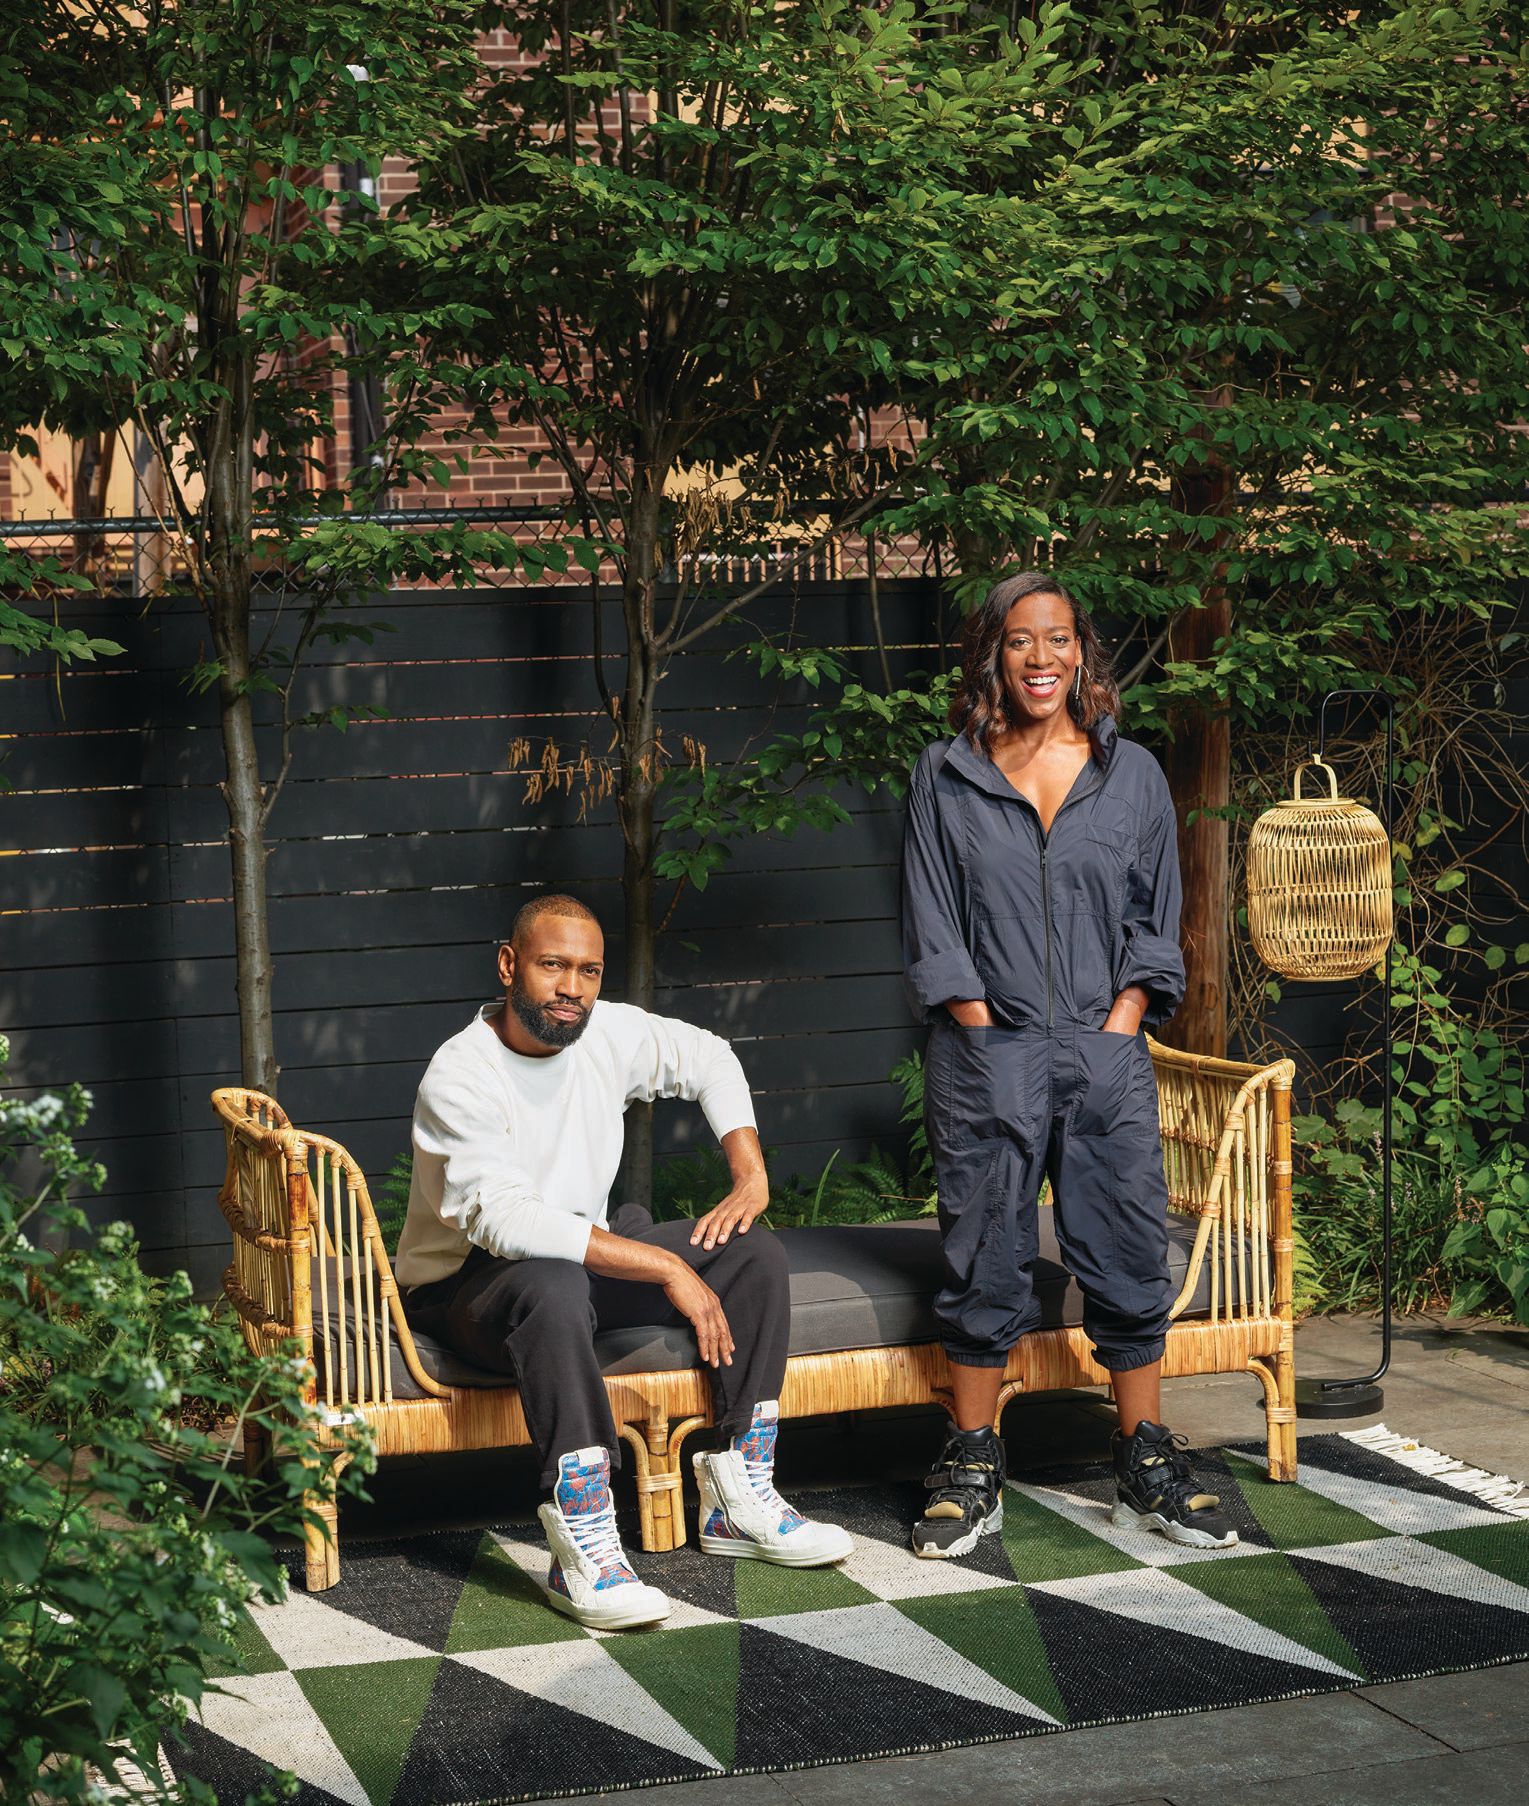 “Sneaking Around”: Quinn and Augustin-Quinn in their backyard garden. Photographed by Frank Frances